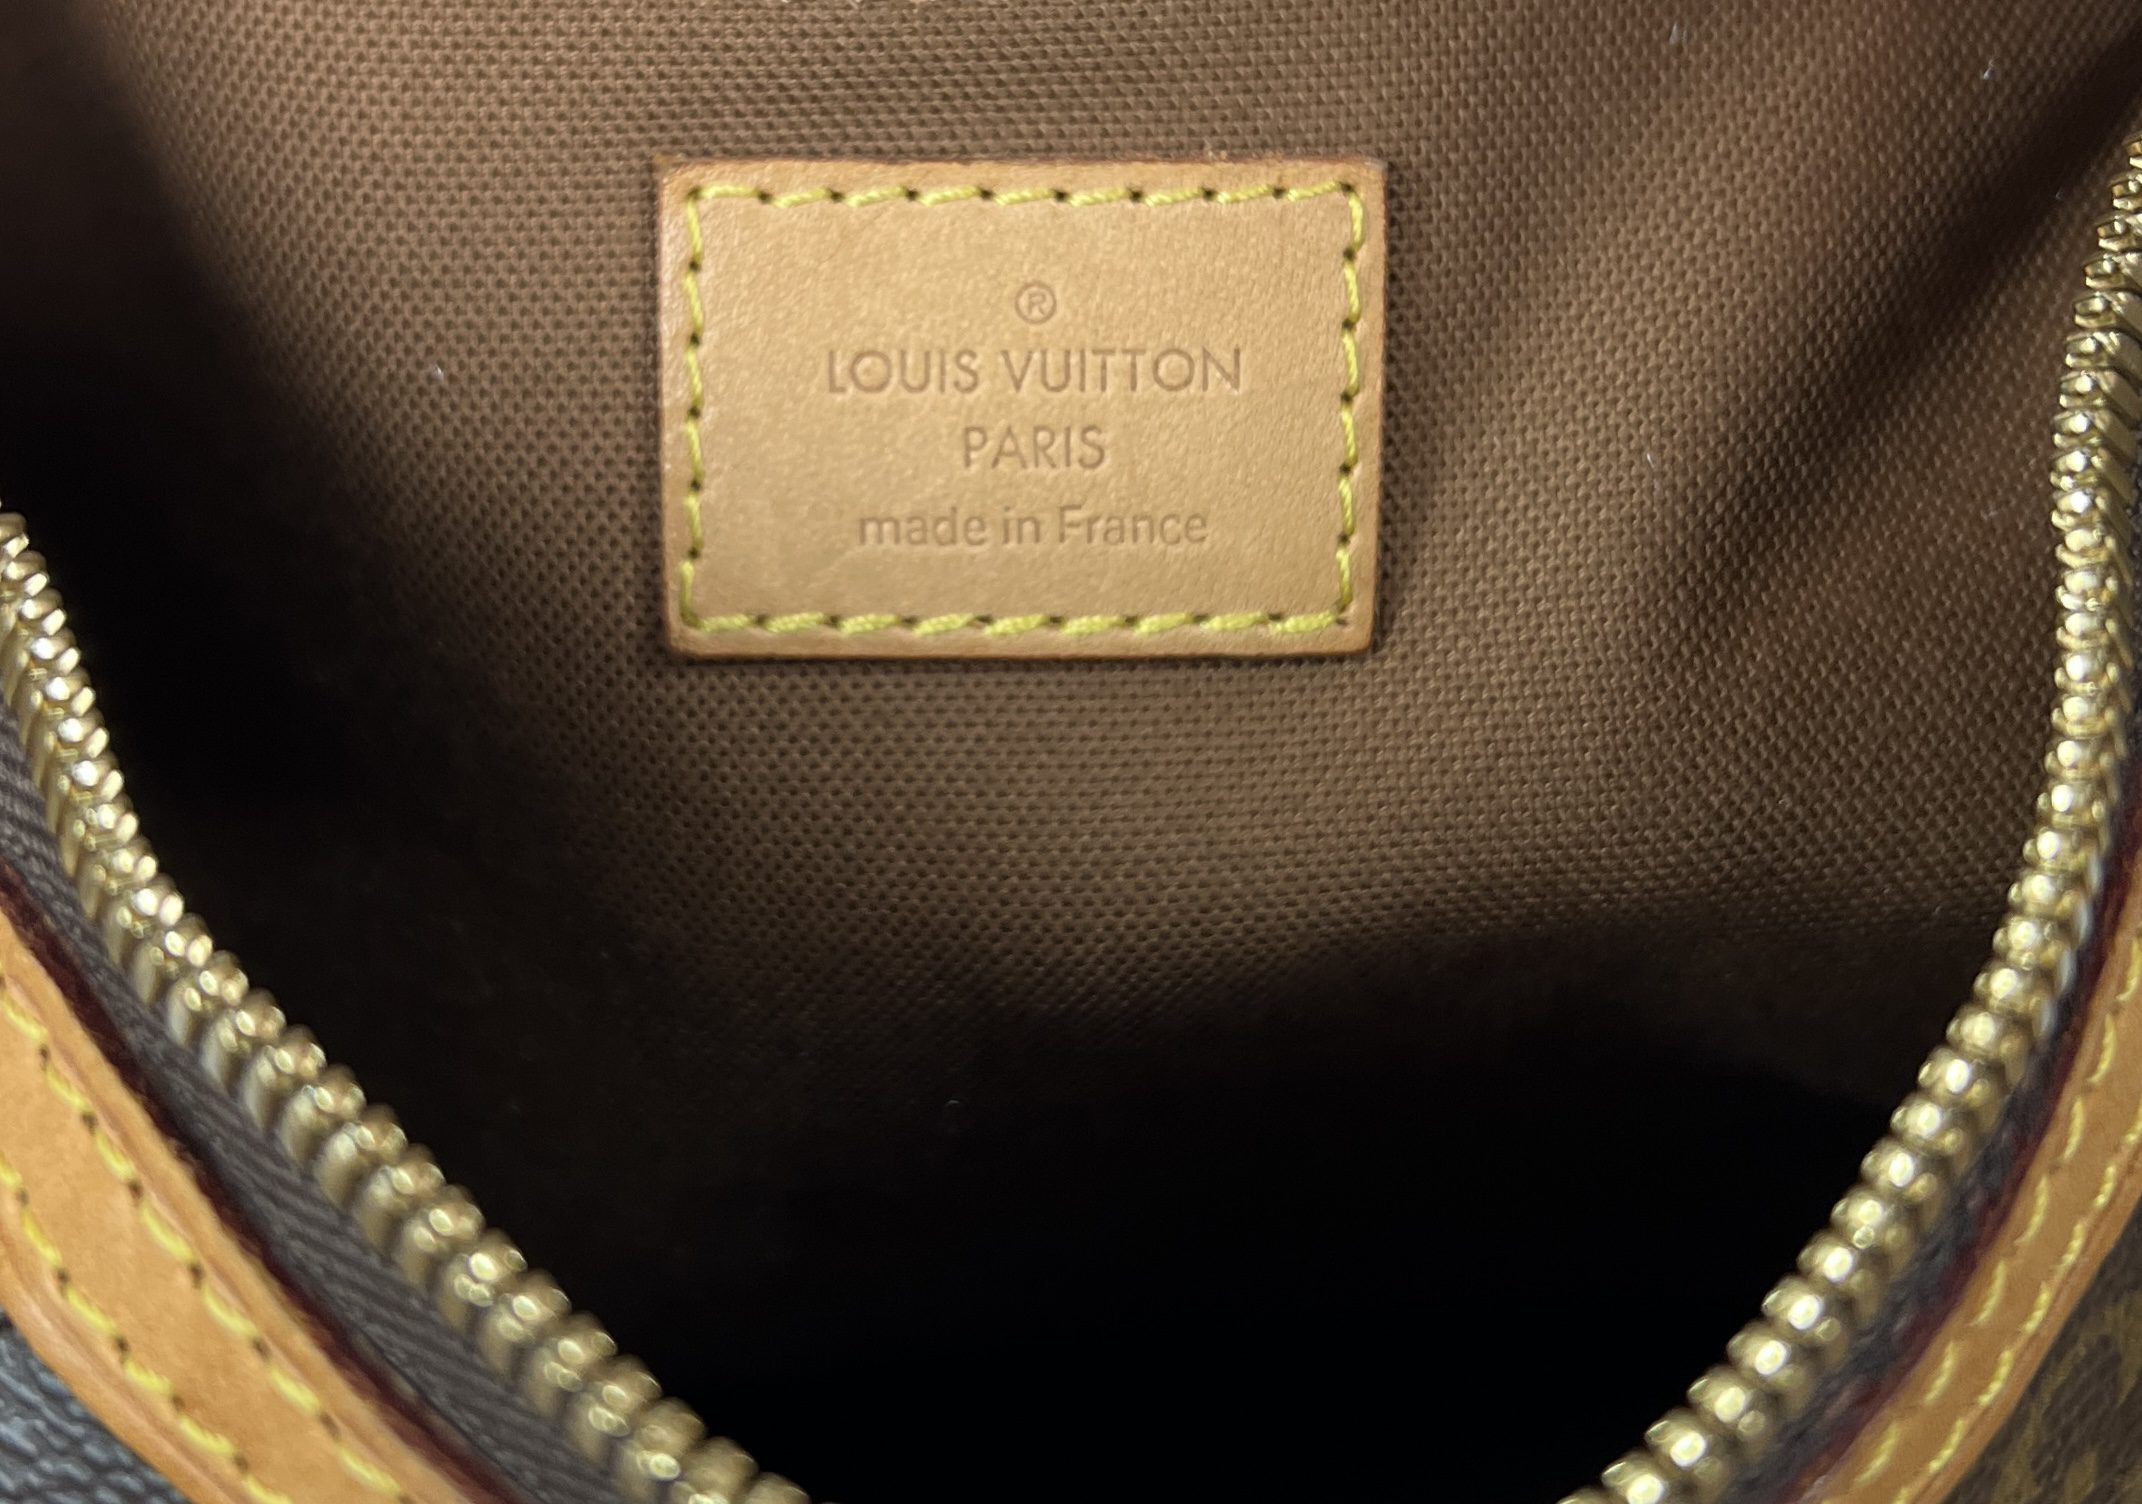 The Louis Vuitton Thames GM in monogram. Beautiful. #lvoe